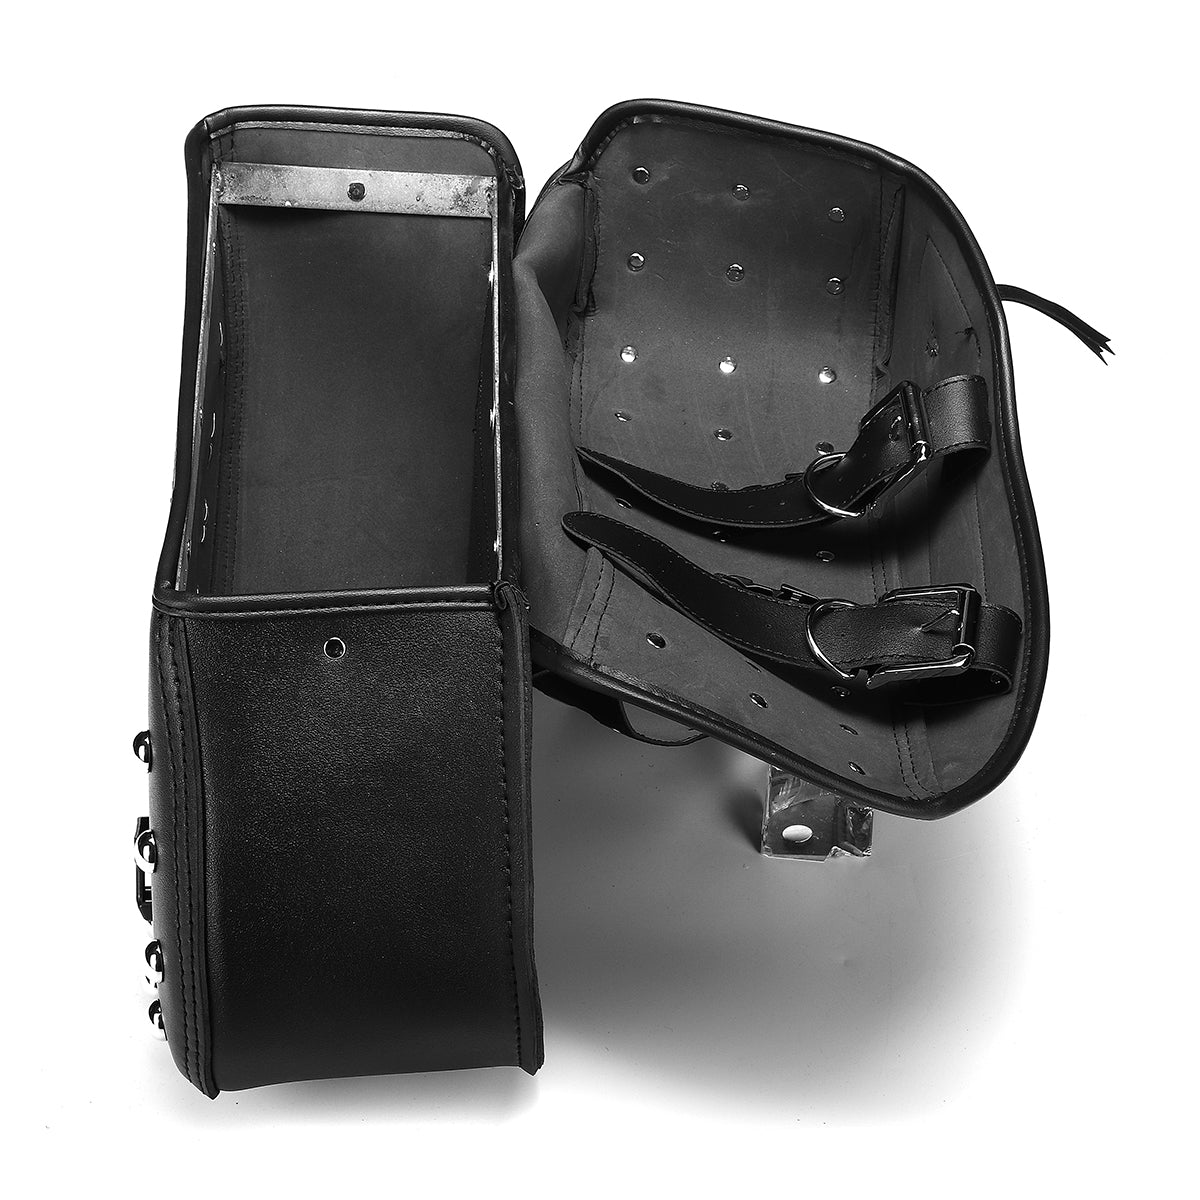 Dim Gray Motorcycle PU Leather Saddlebags Side Bag For Harley Sportster 1200XL 883